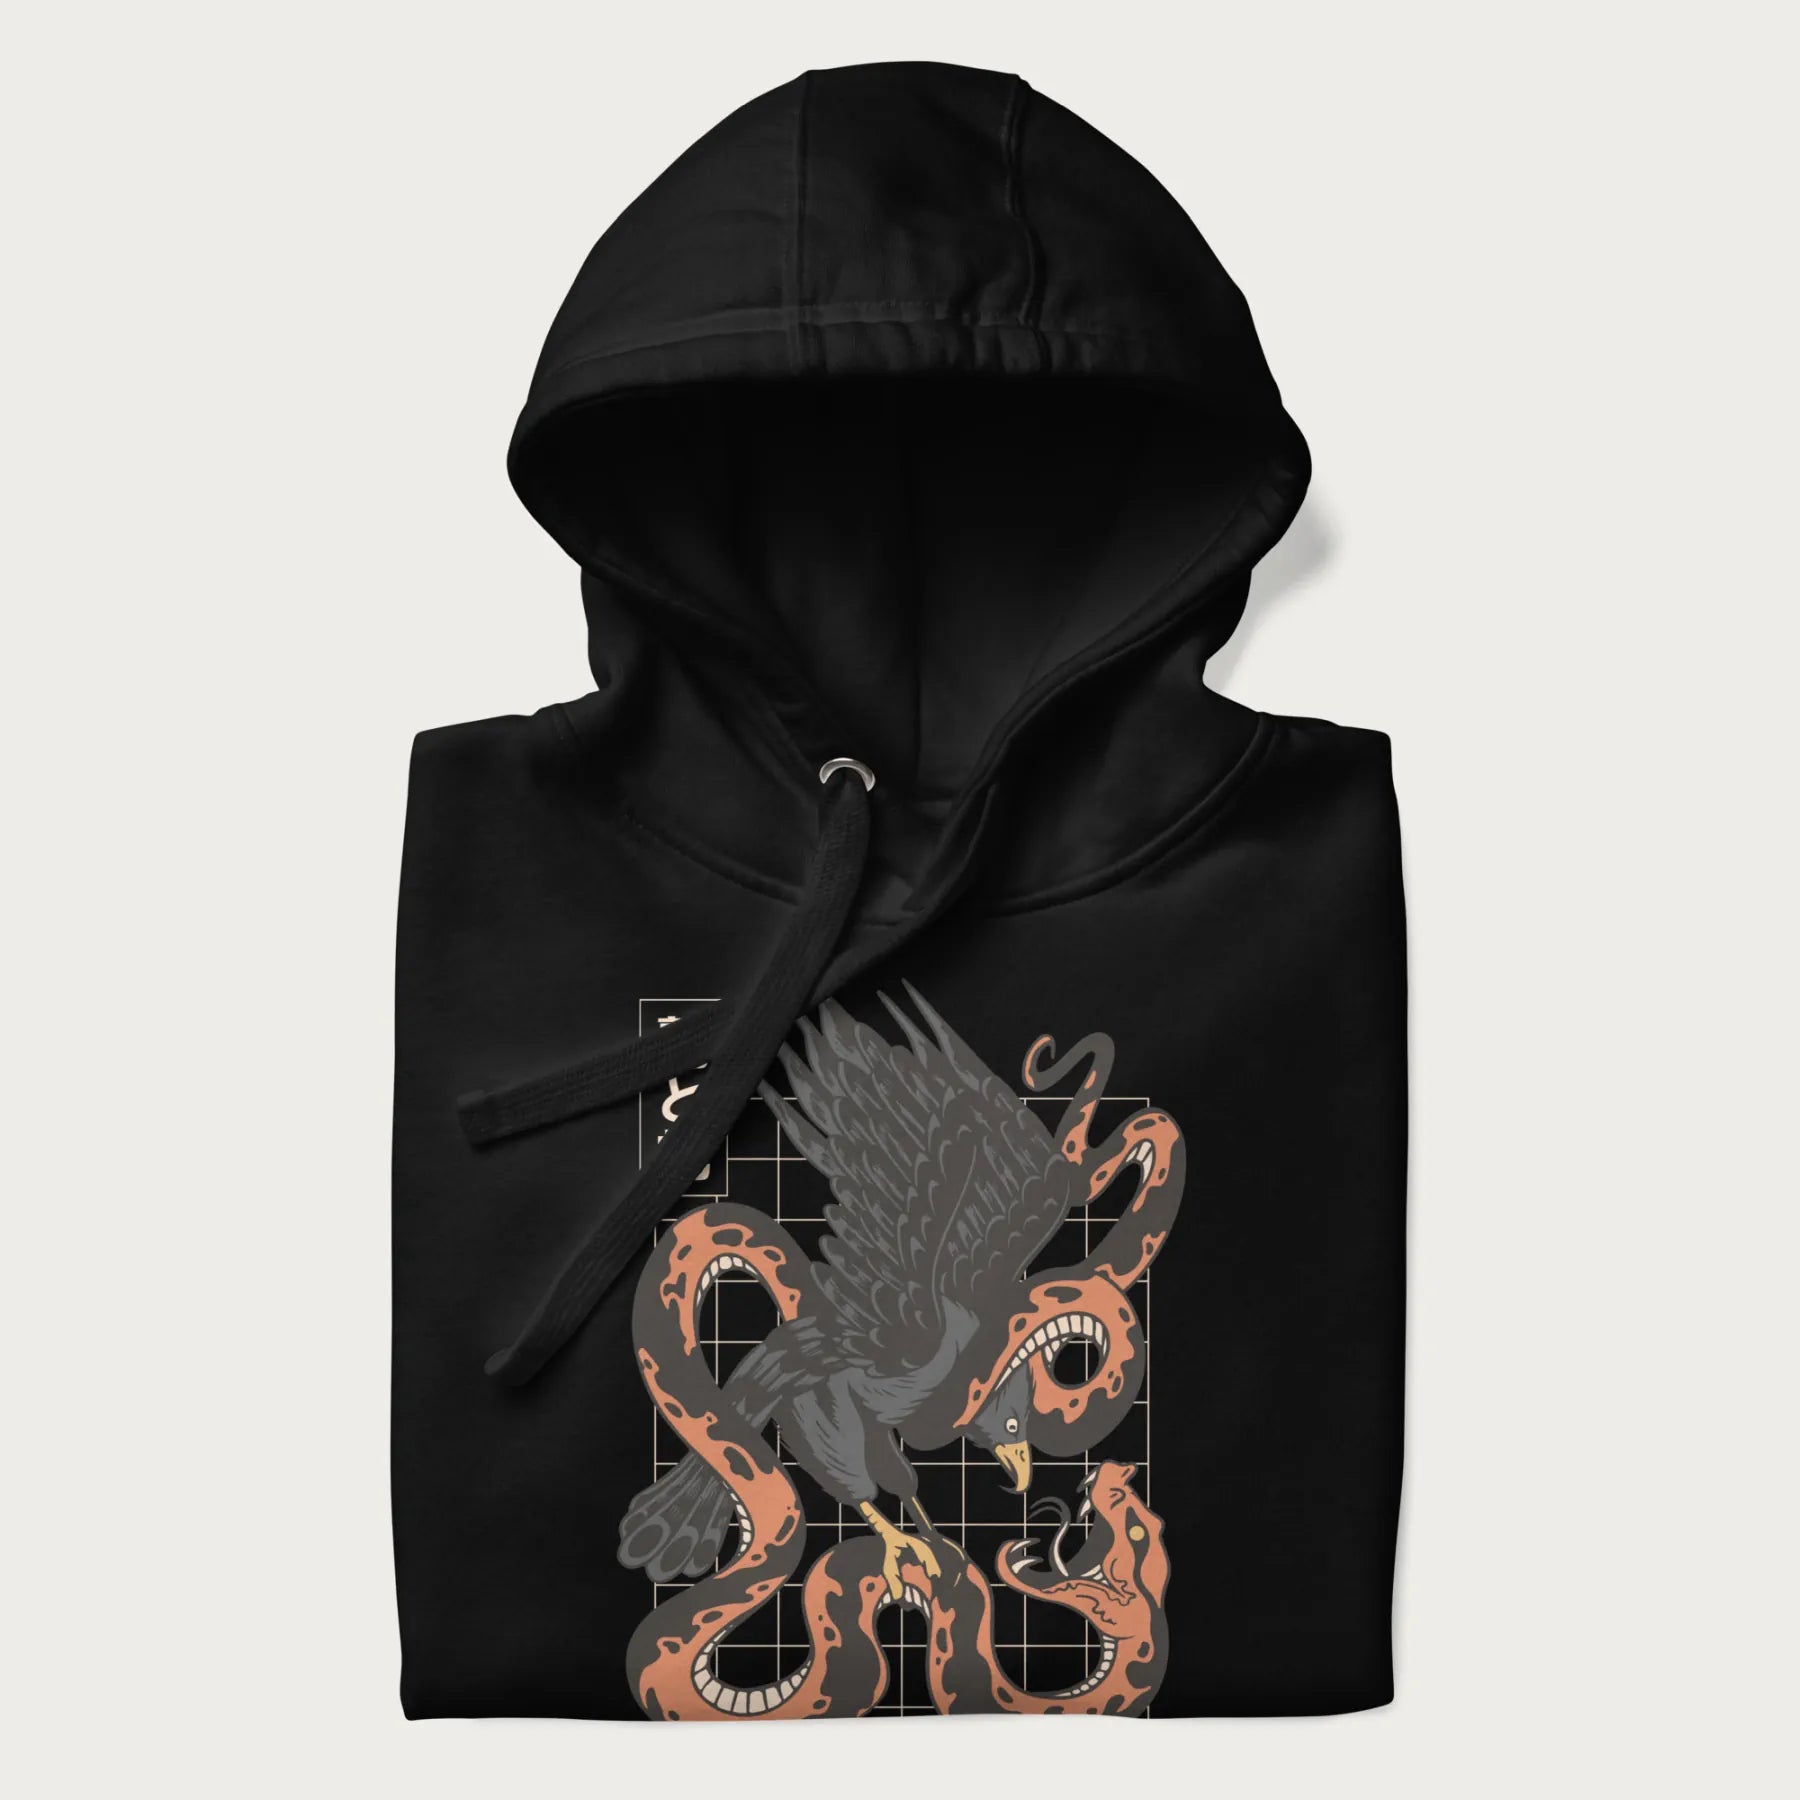 Folded black hoodie with Japanese text and a graphic of an eagle battling a snake, with the text 'Tokyo Japan' underneath.